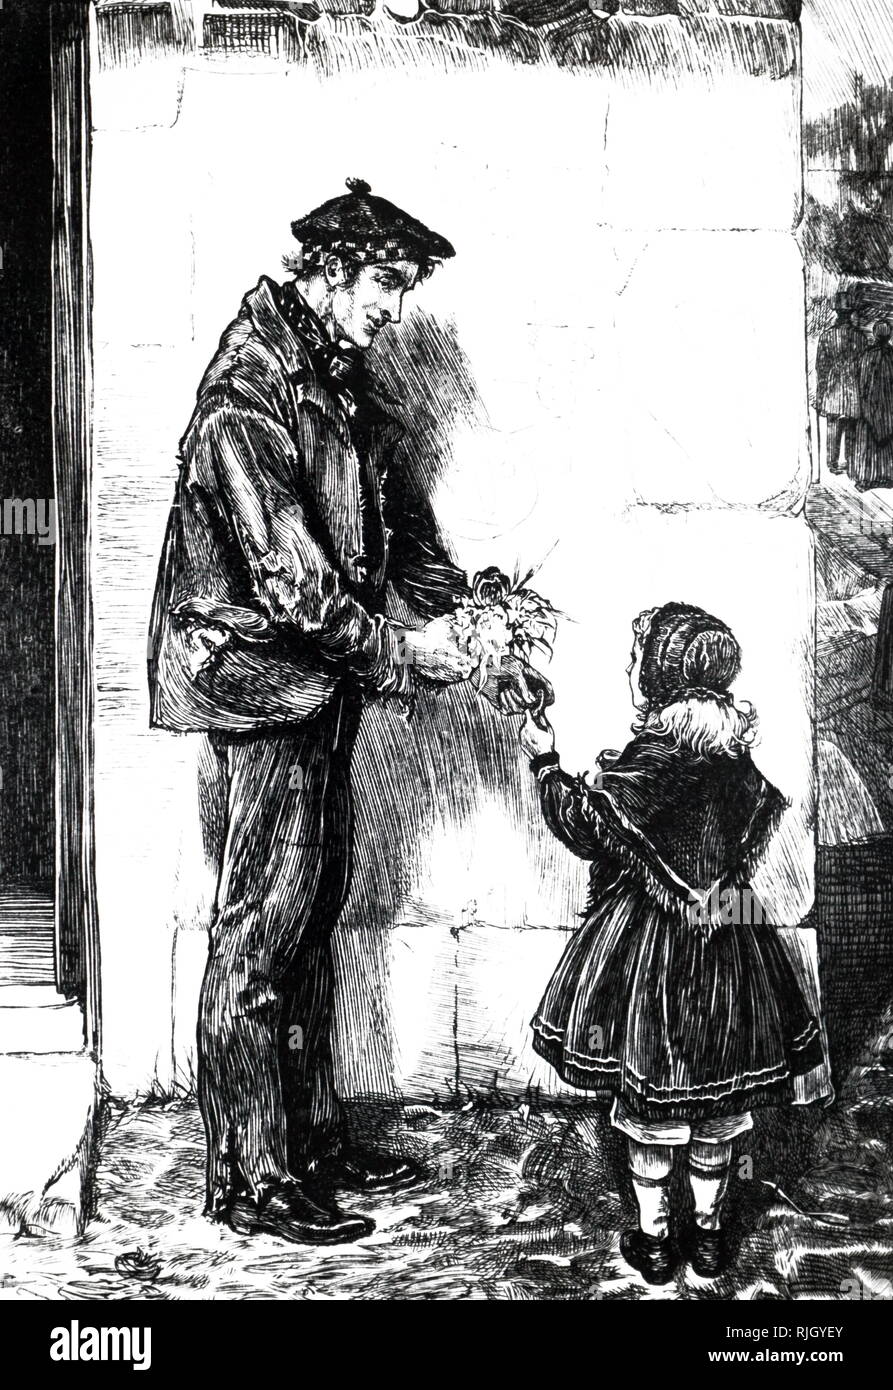 An engraving depicting a man wearing a beaver hat speaking with a little girl wearing a bonnet and shawl. Illustrated by William Small (1843-1929) a Scottish artist. Dated 19th century Dated 19th century Stock Photo